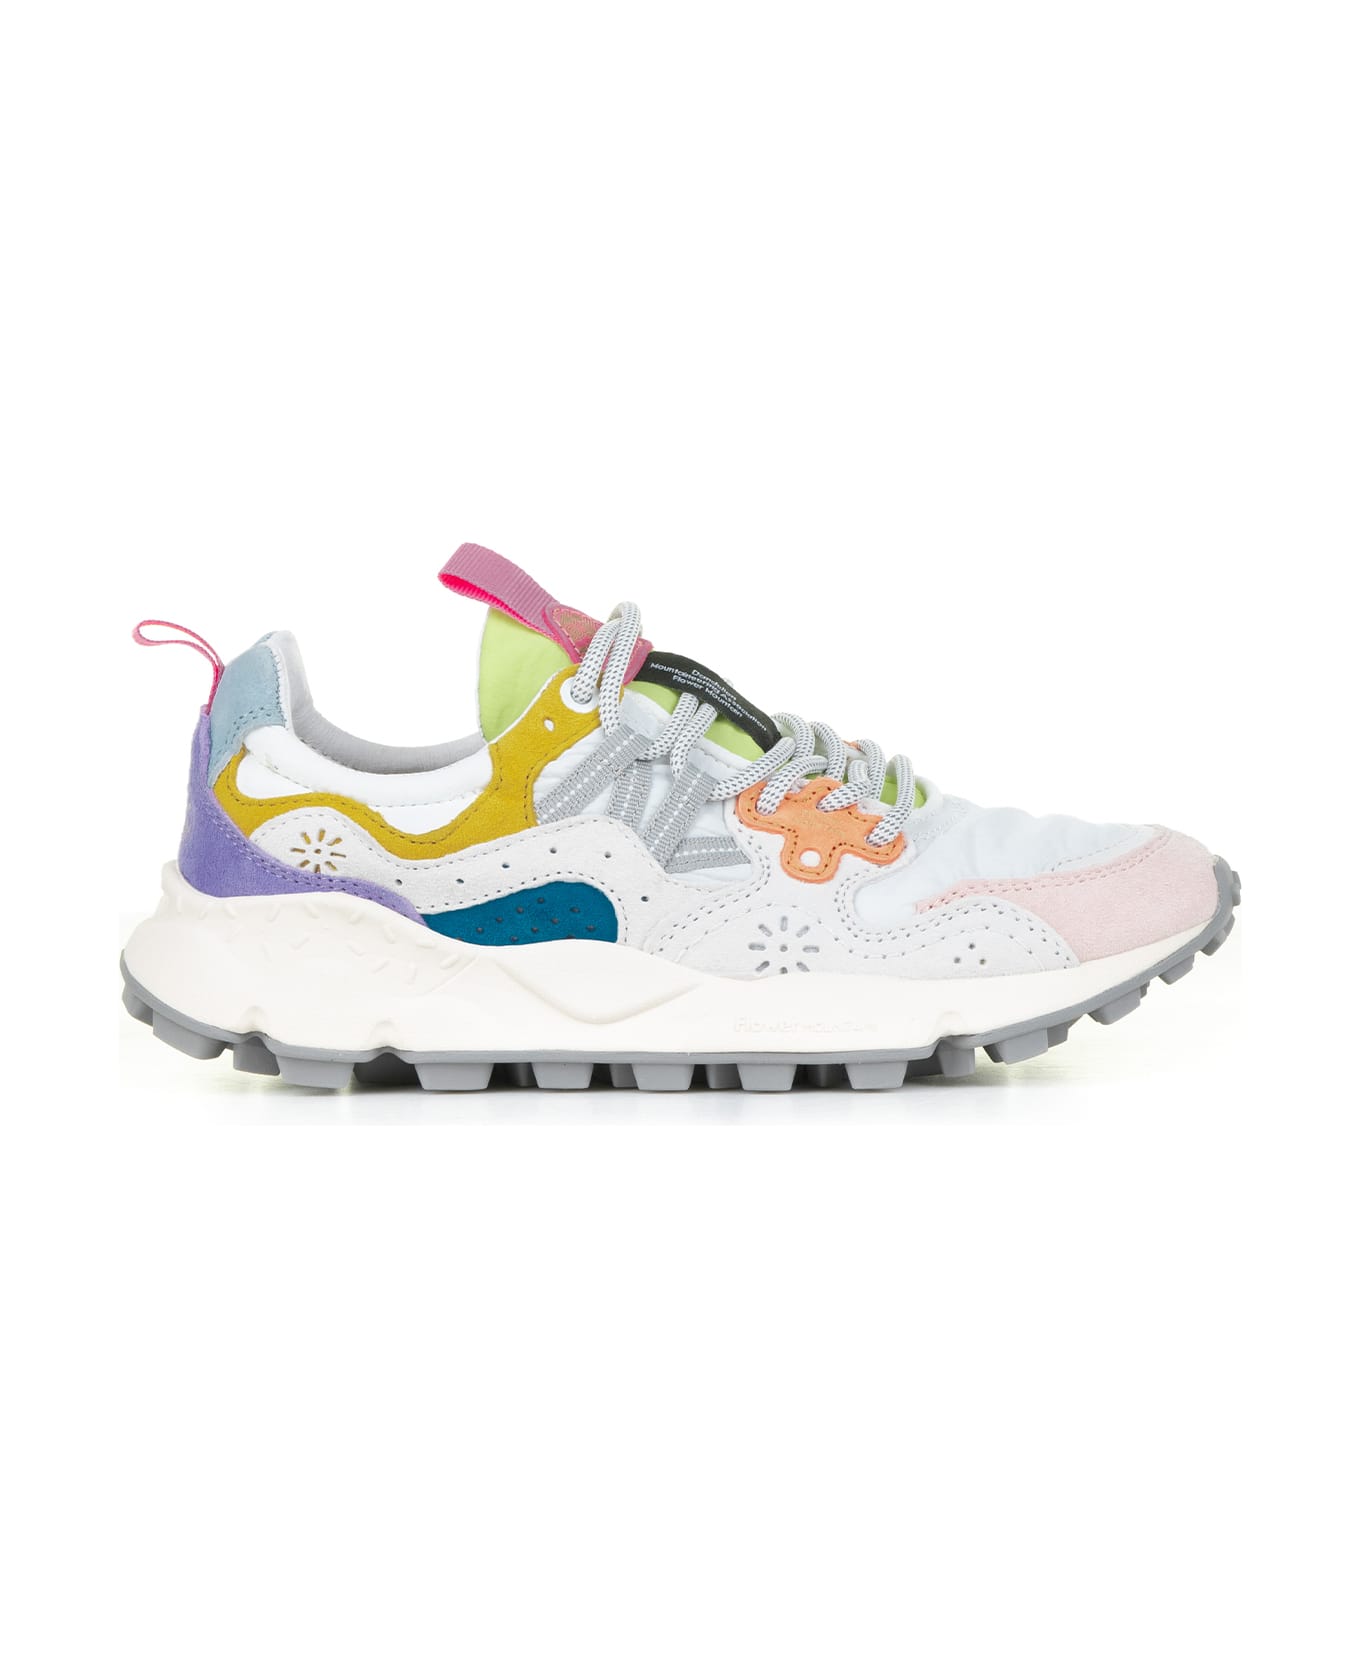 Flower Mountain Multicolored Yamano Sneakers In Suede And Nylon - WHITE PINK